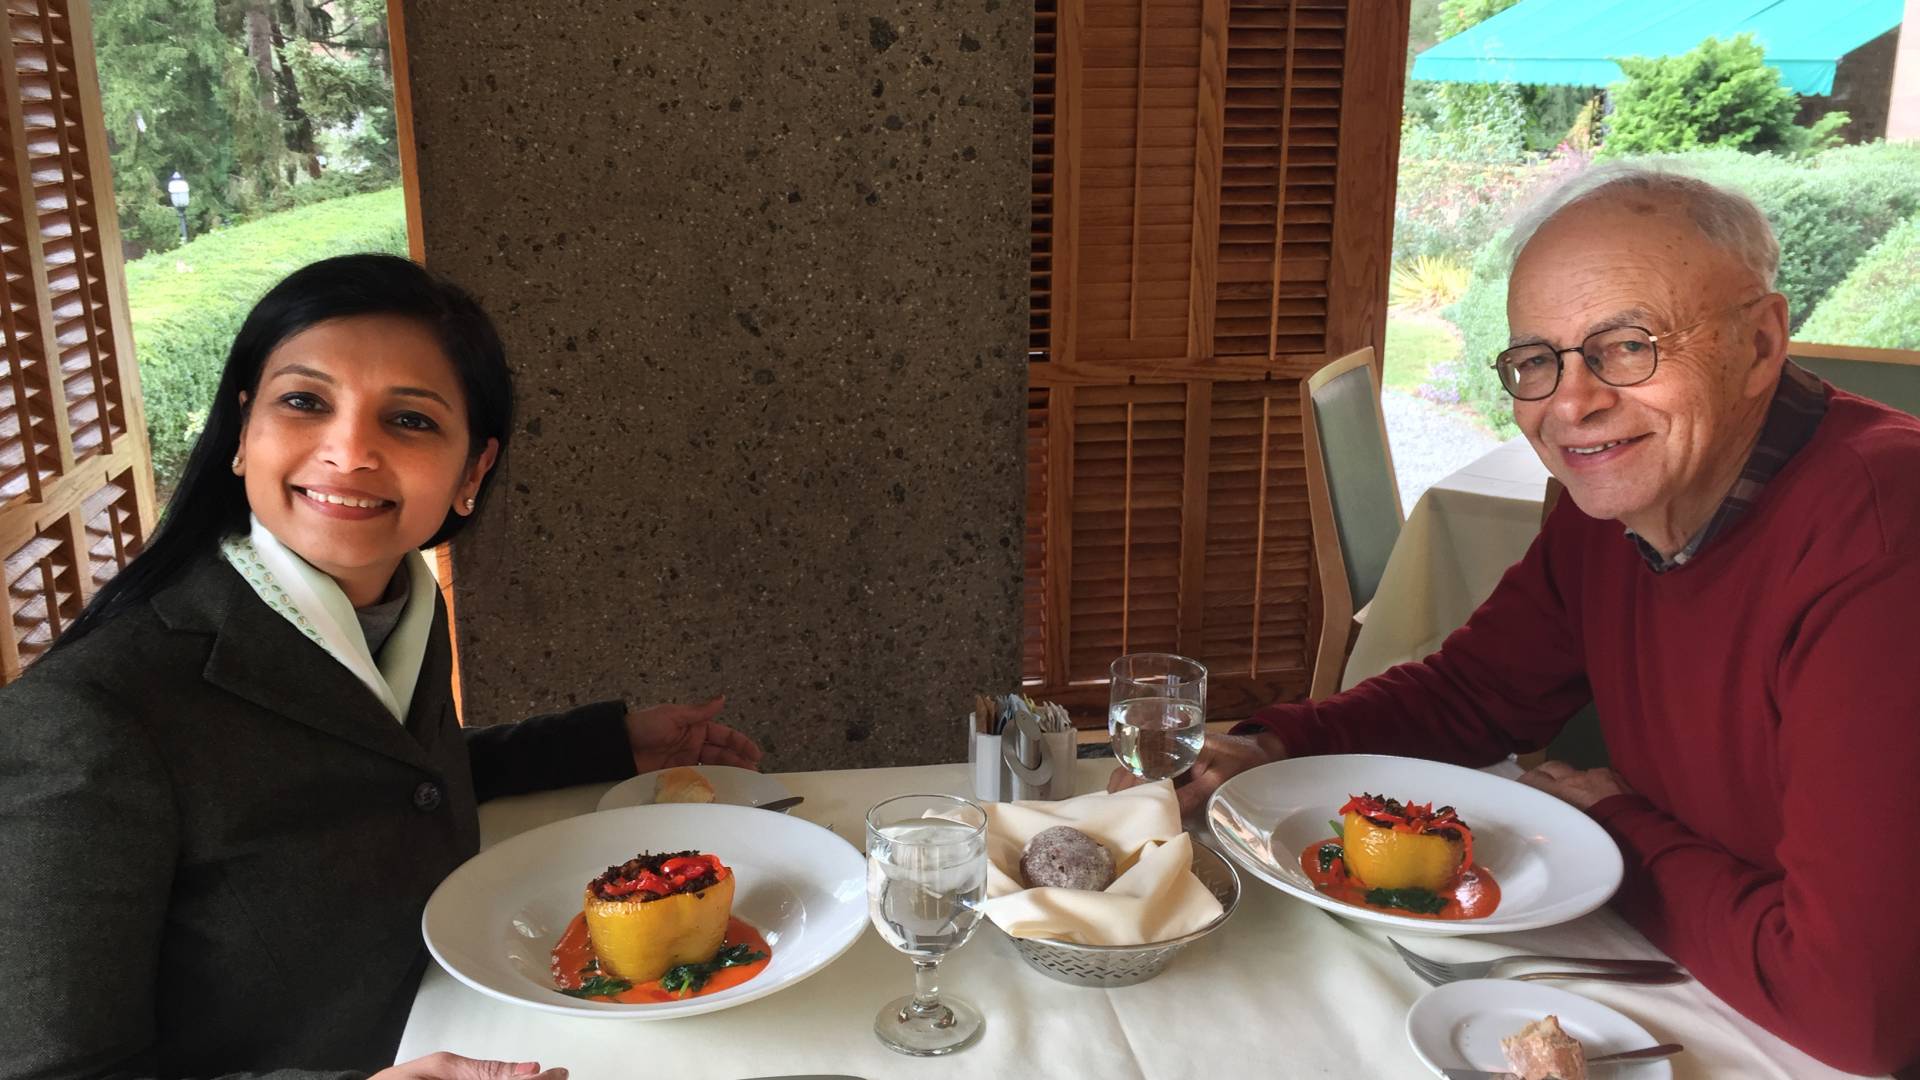 Smitha Haneef and Peter Singer eating lunch together